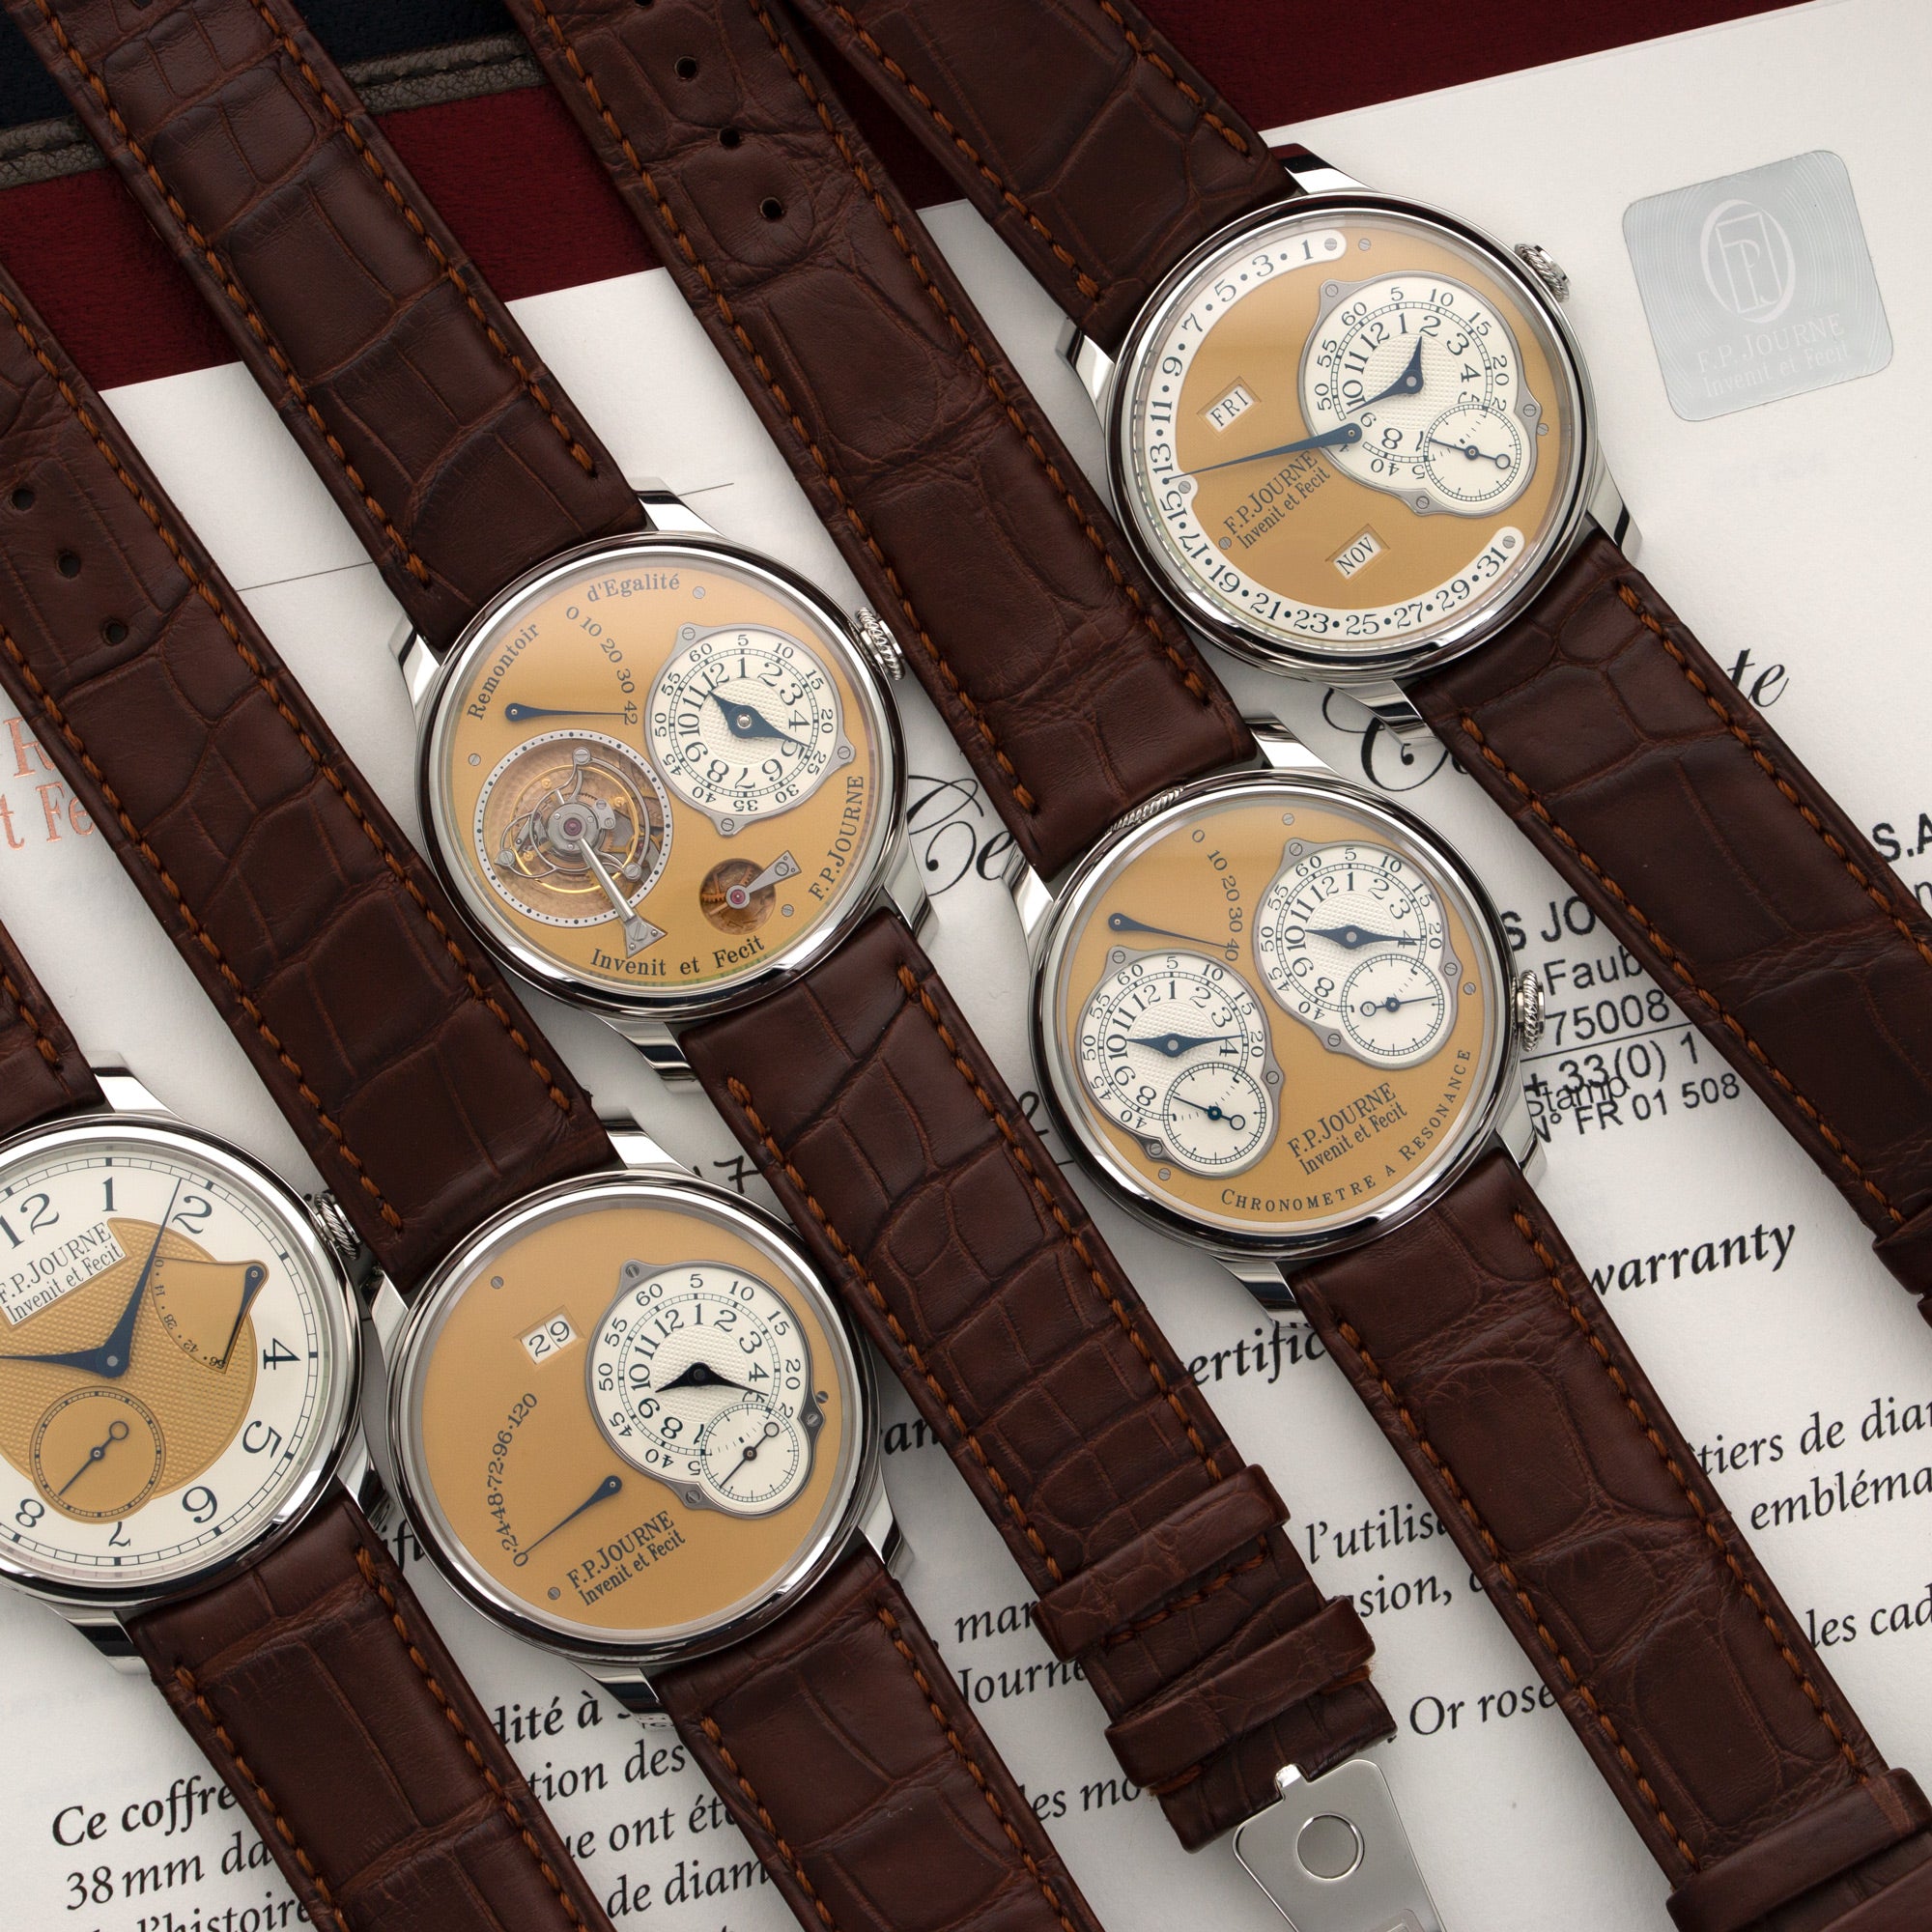 FP Journe - F.P. Journe Steel End of 38mm Five Watch Set from 2015 - The Keystone Watches